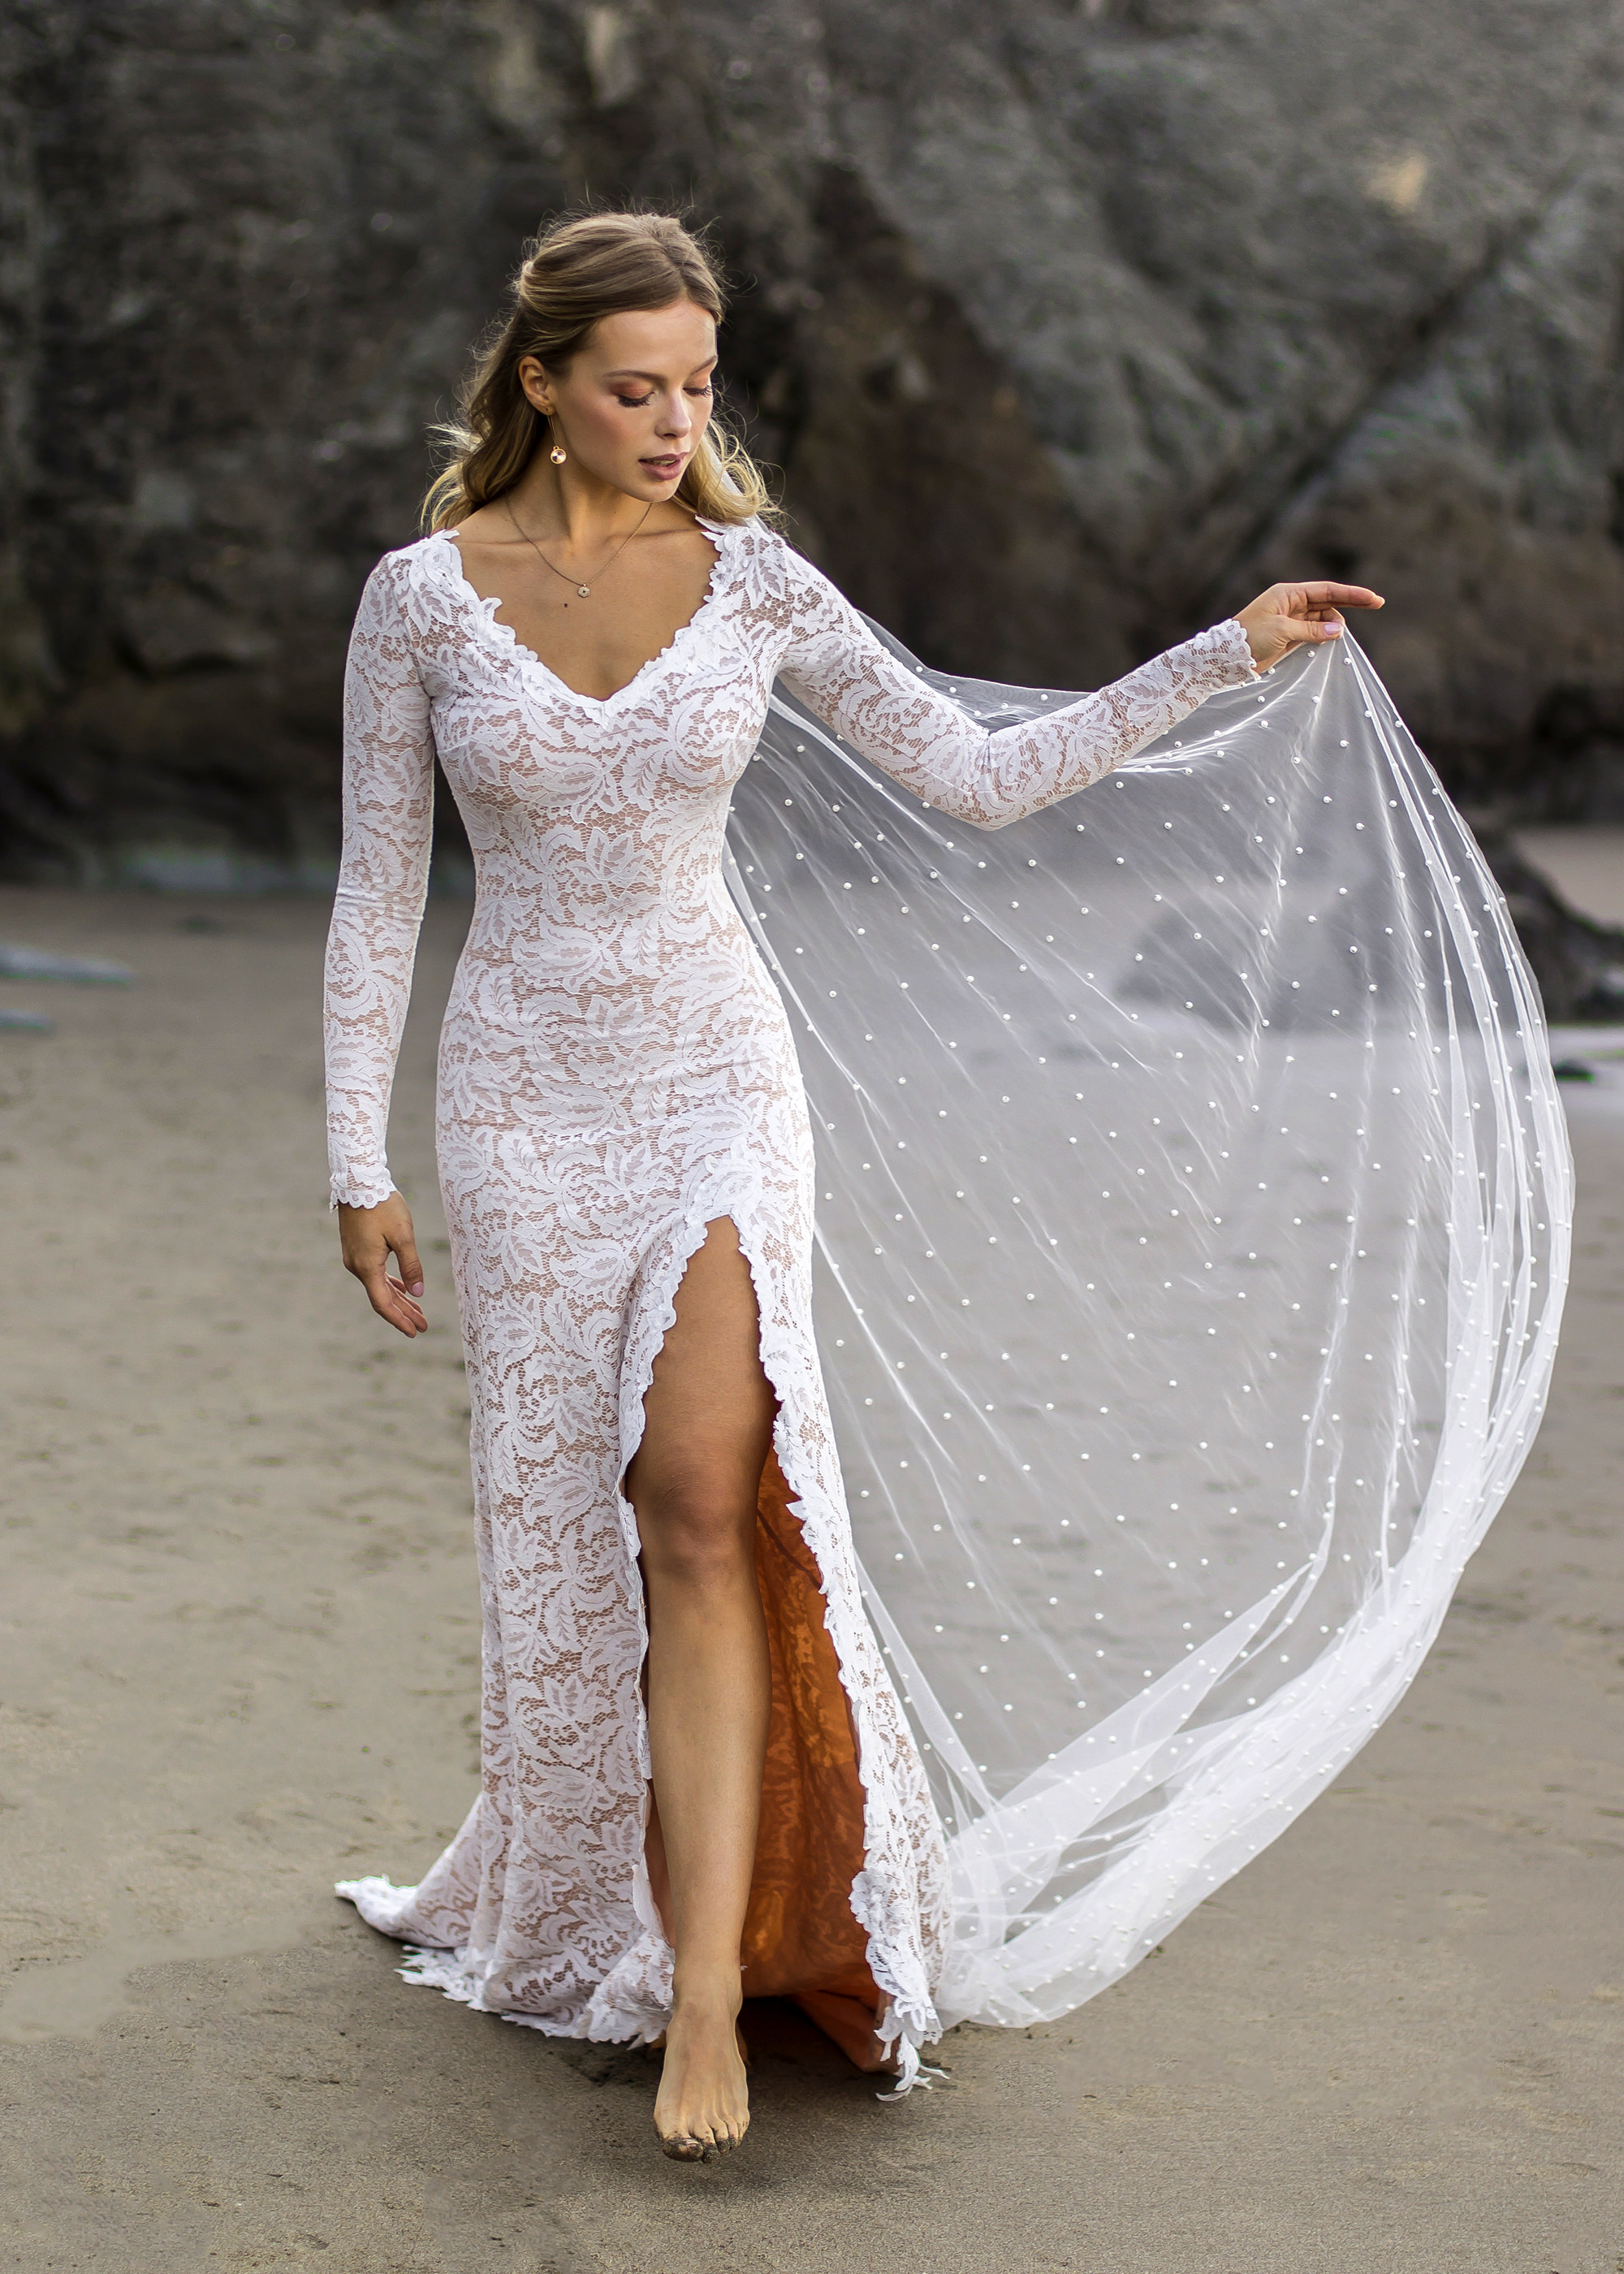 stretch lace wedding dress with high slit and open back